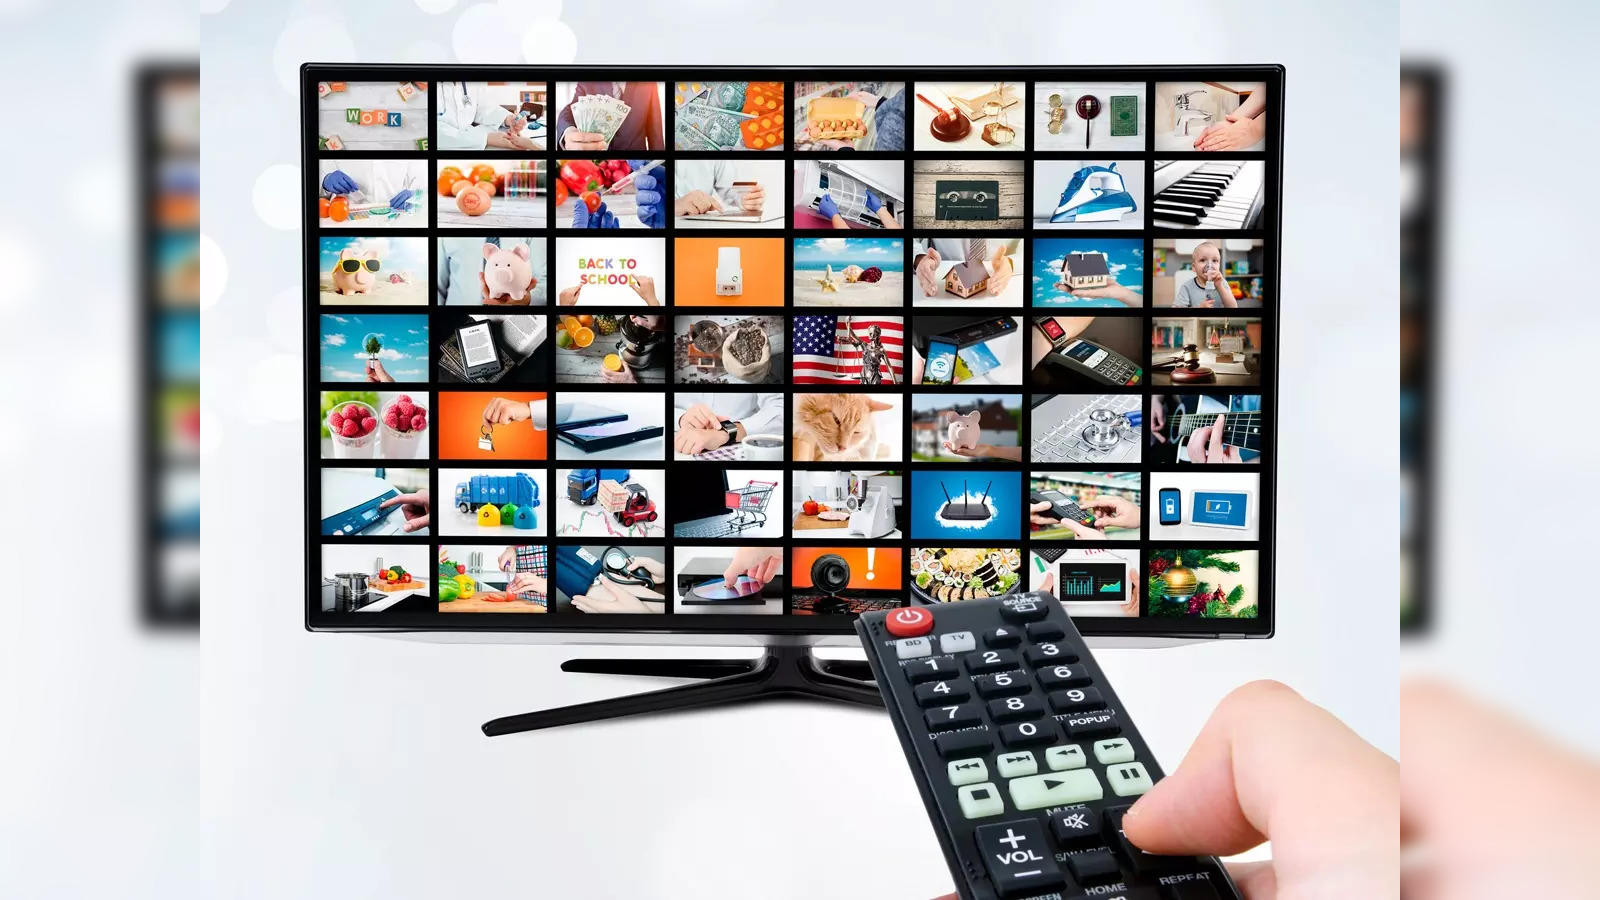 Turn off the TV - Goodwin Investment